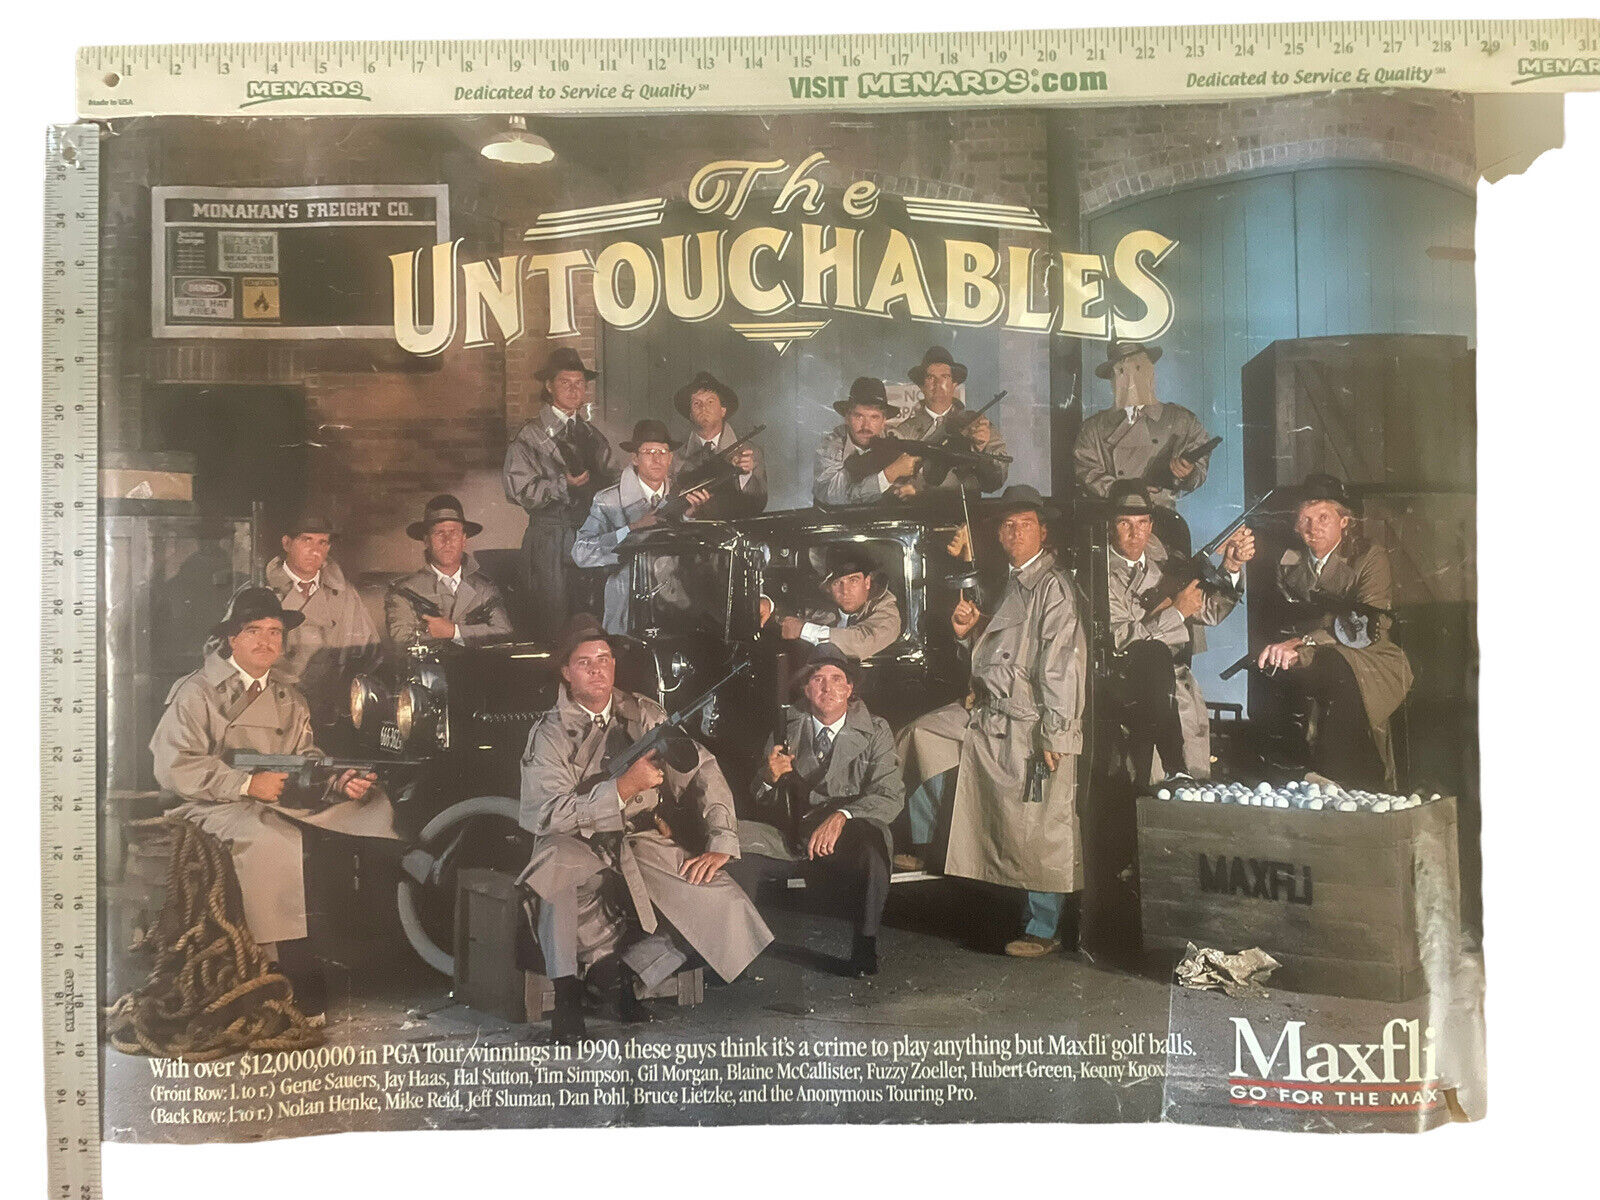 Pga Golf Poster From 1990: Maxfli "the Untouchables" 29"x21" Rare Find Vintage